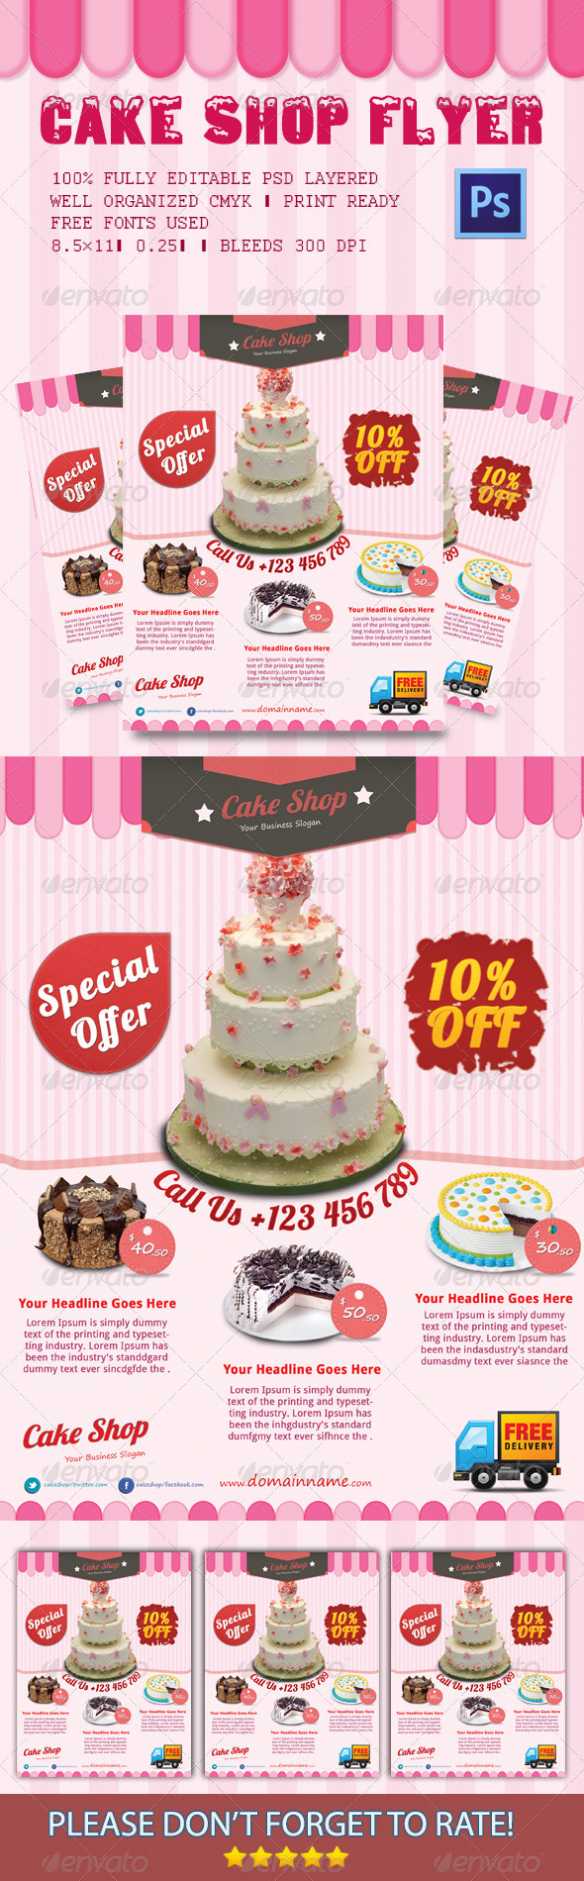 Cakes Flyer Templates From Graphicriver within Cake Flyer Template Free